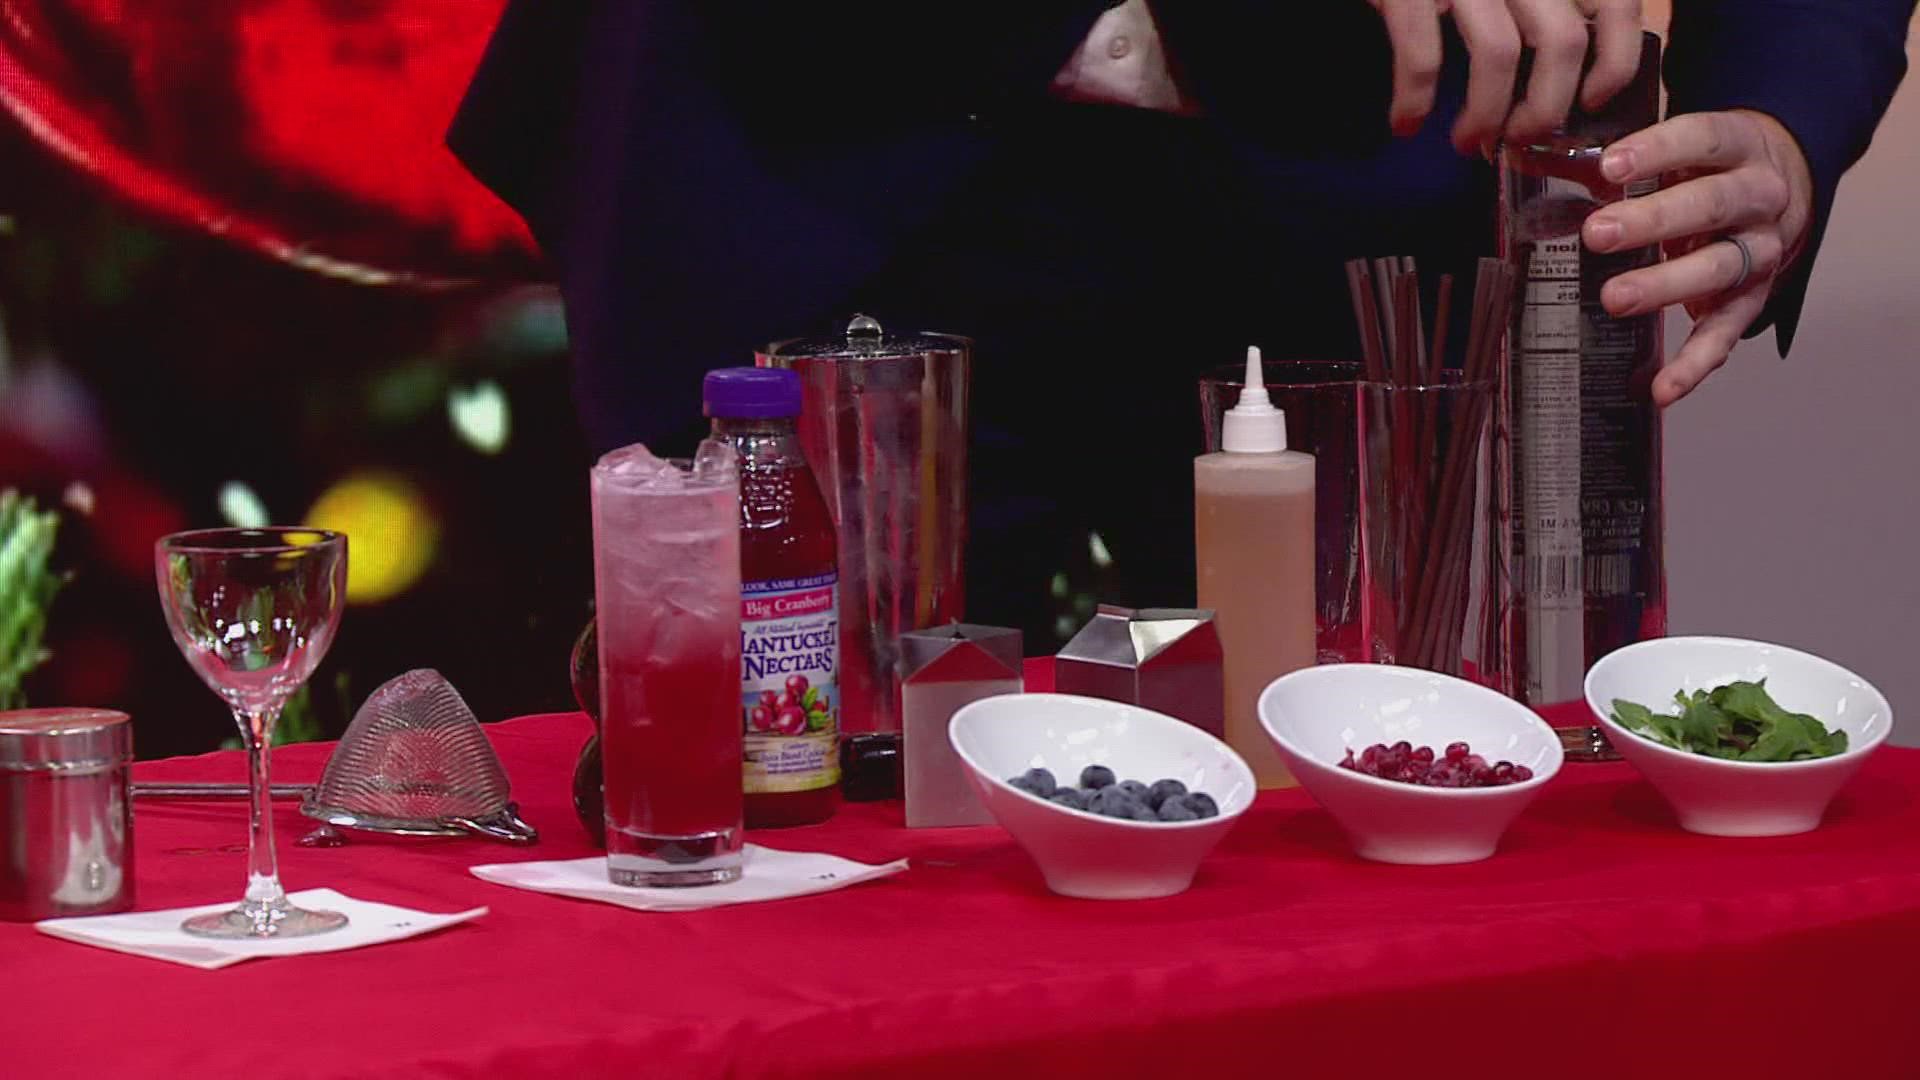 If you're looking for ways to "shake up" your holiday party drink menu, W Seattle Living Room Bar shares some ideas. Several free events are at the bar in December.